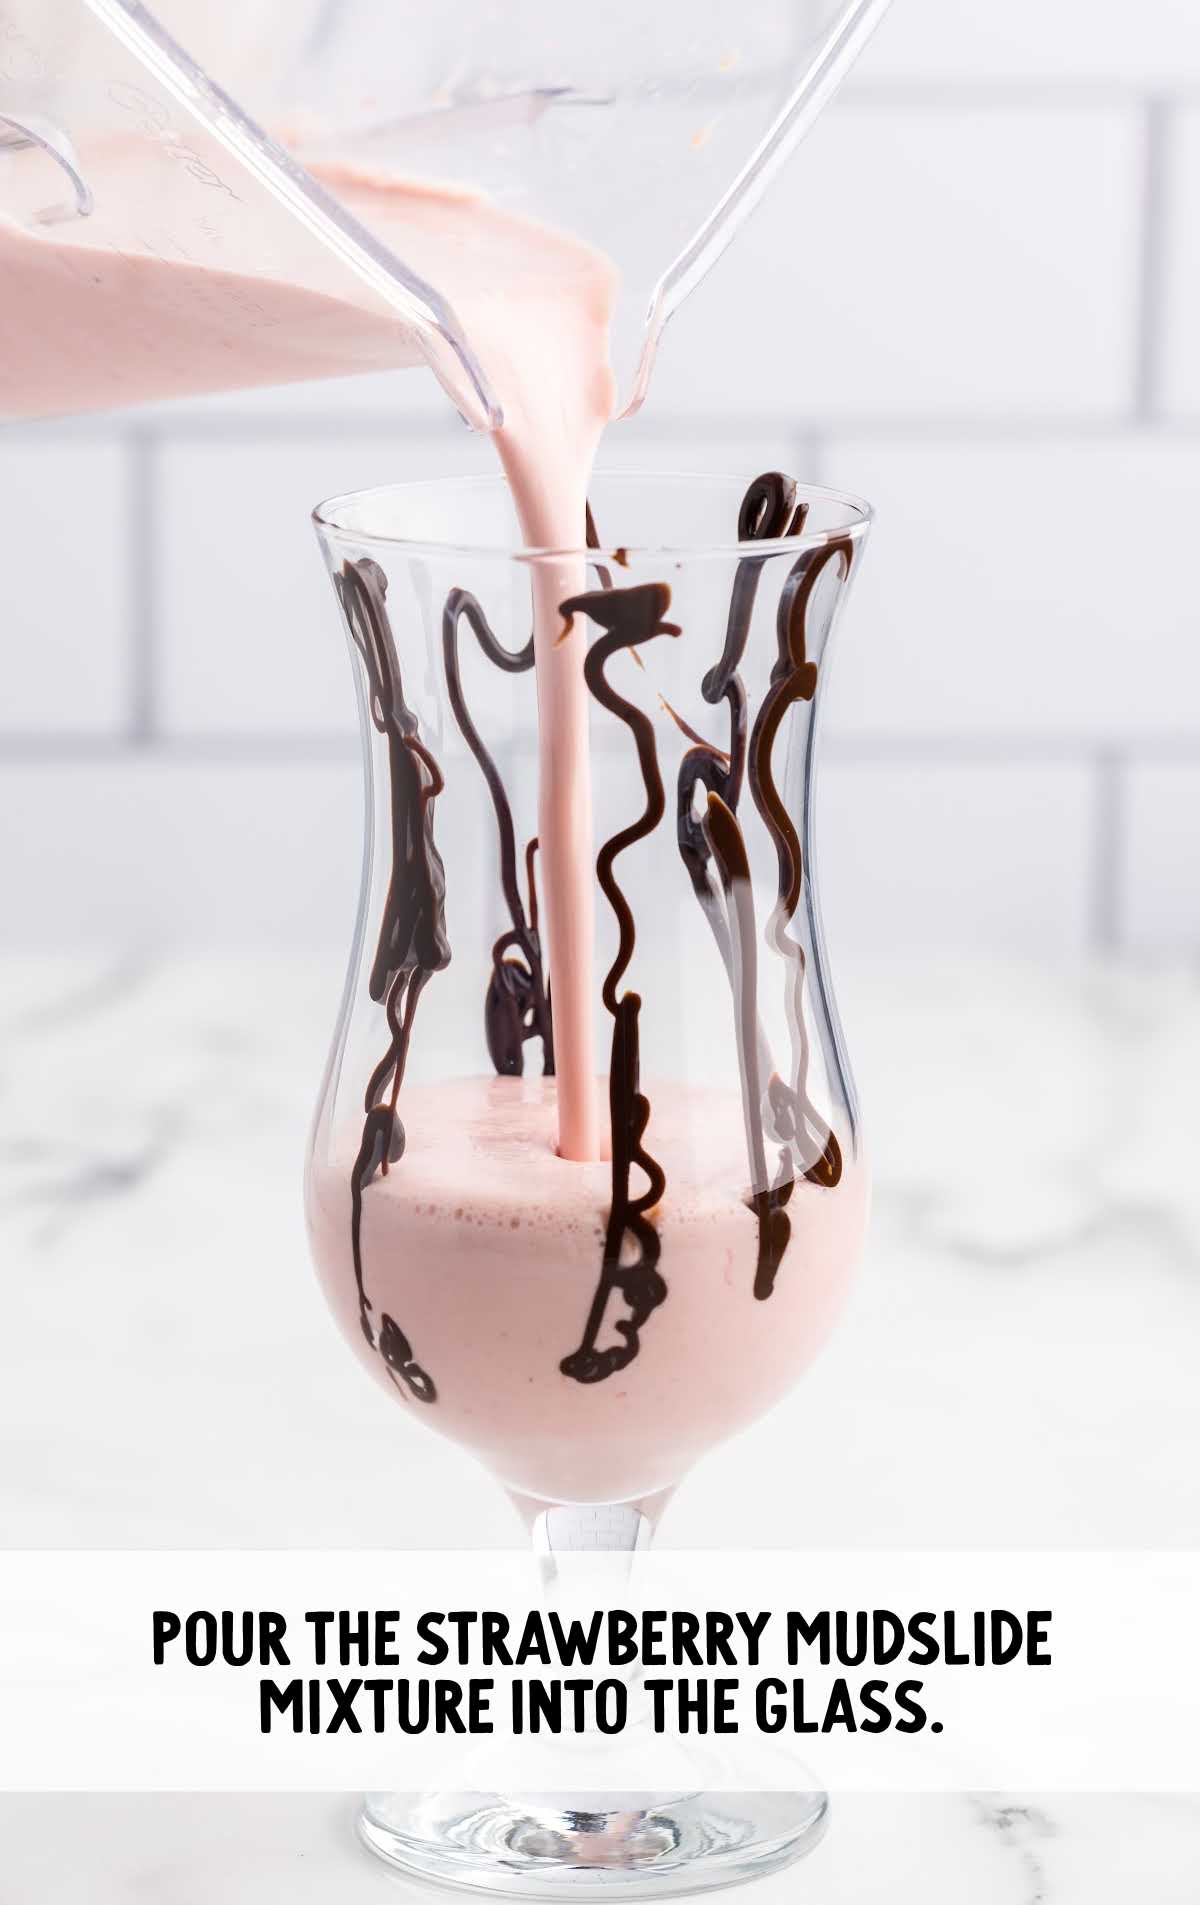 Strawberry Mudslide poured into the glass